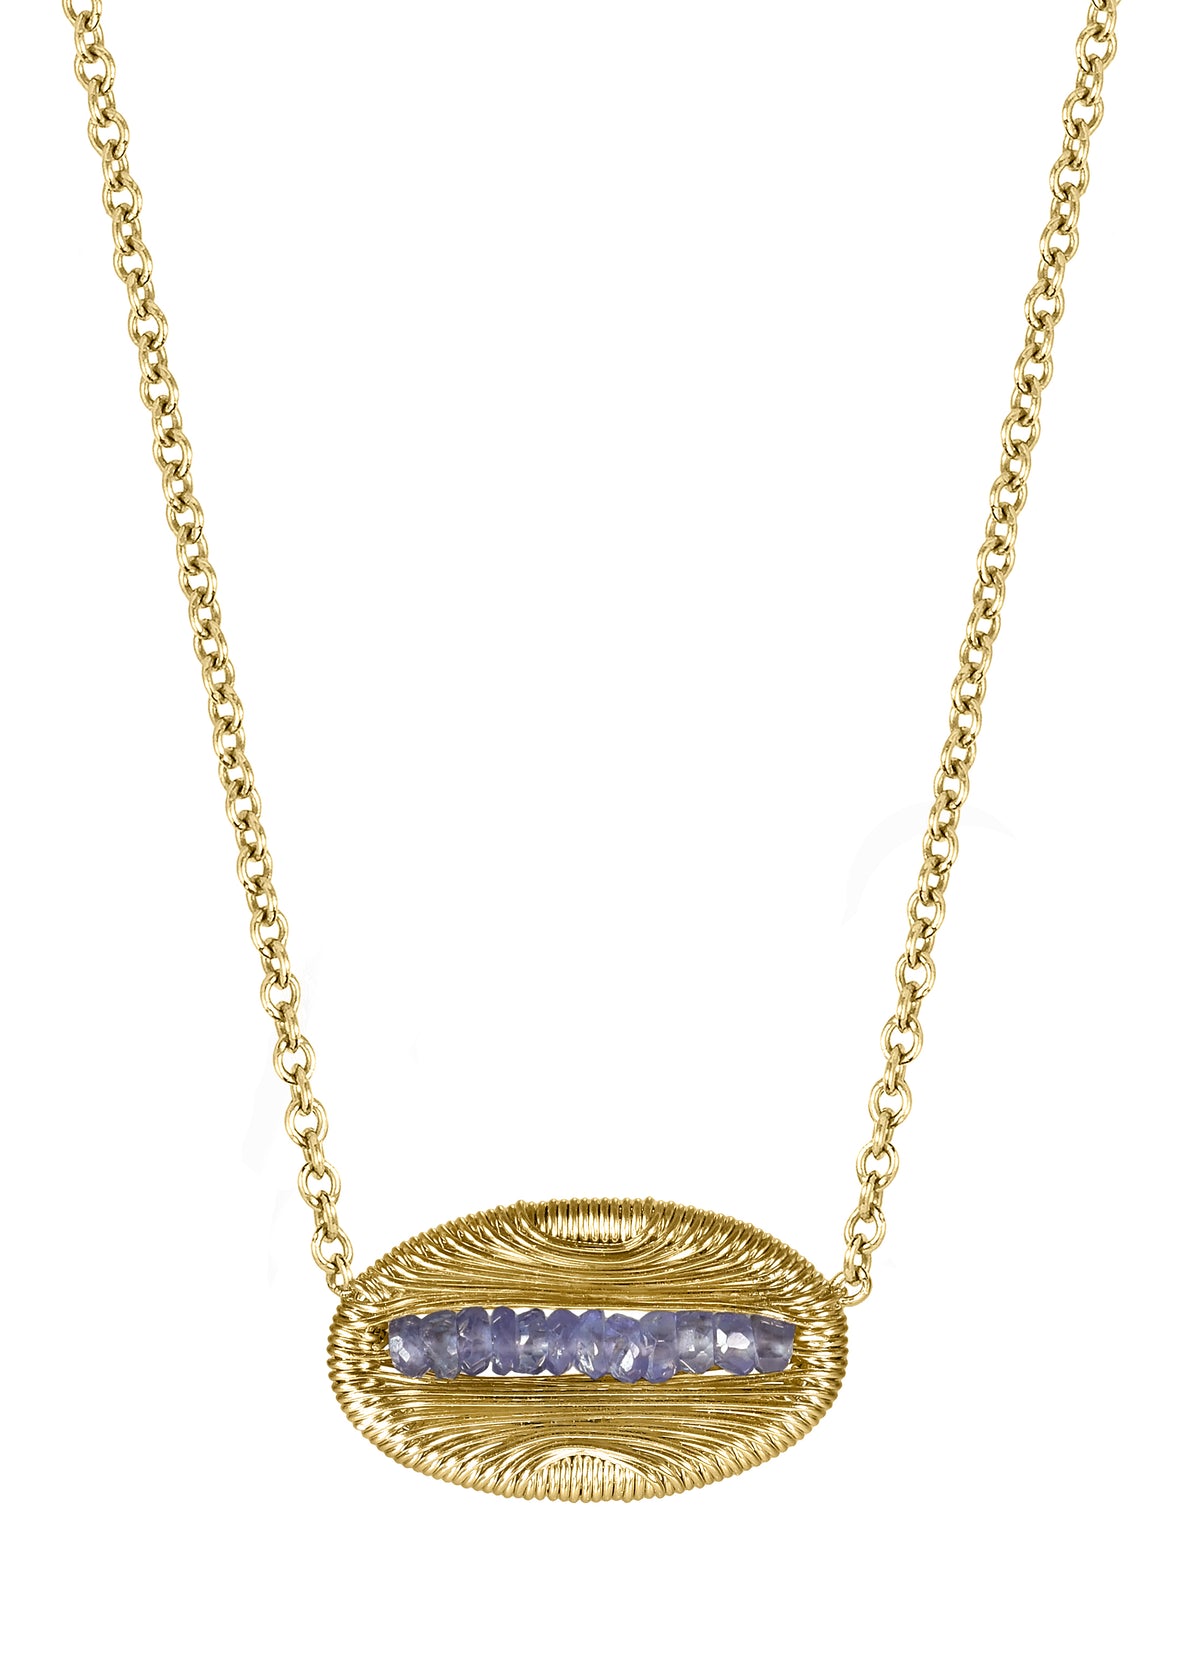 Blue sapphire 14k gold fill Necklace measures 16&quot; in length Pendant measures 3/8&quot; in length and 5/8&quot; in width Handmade in our Los Angeles studio